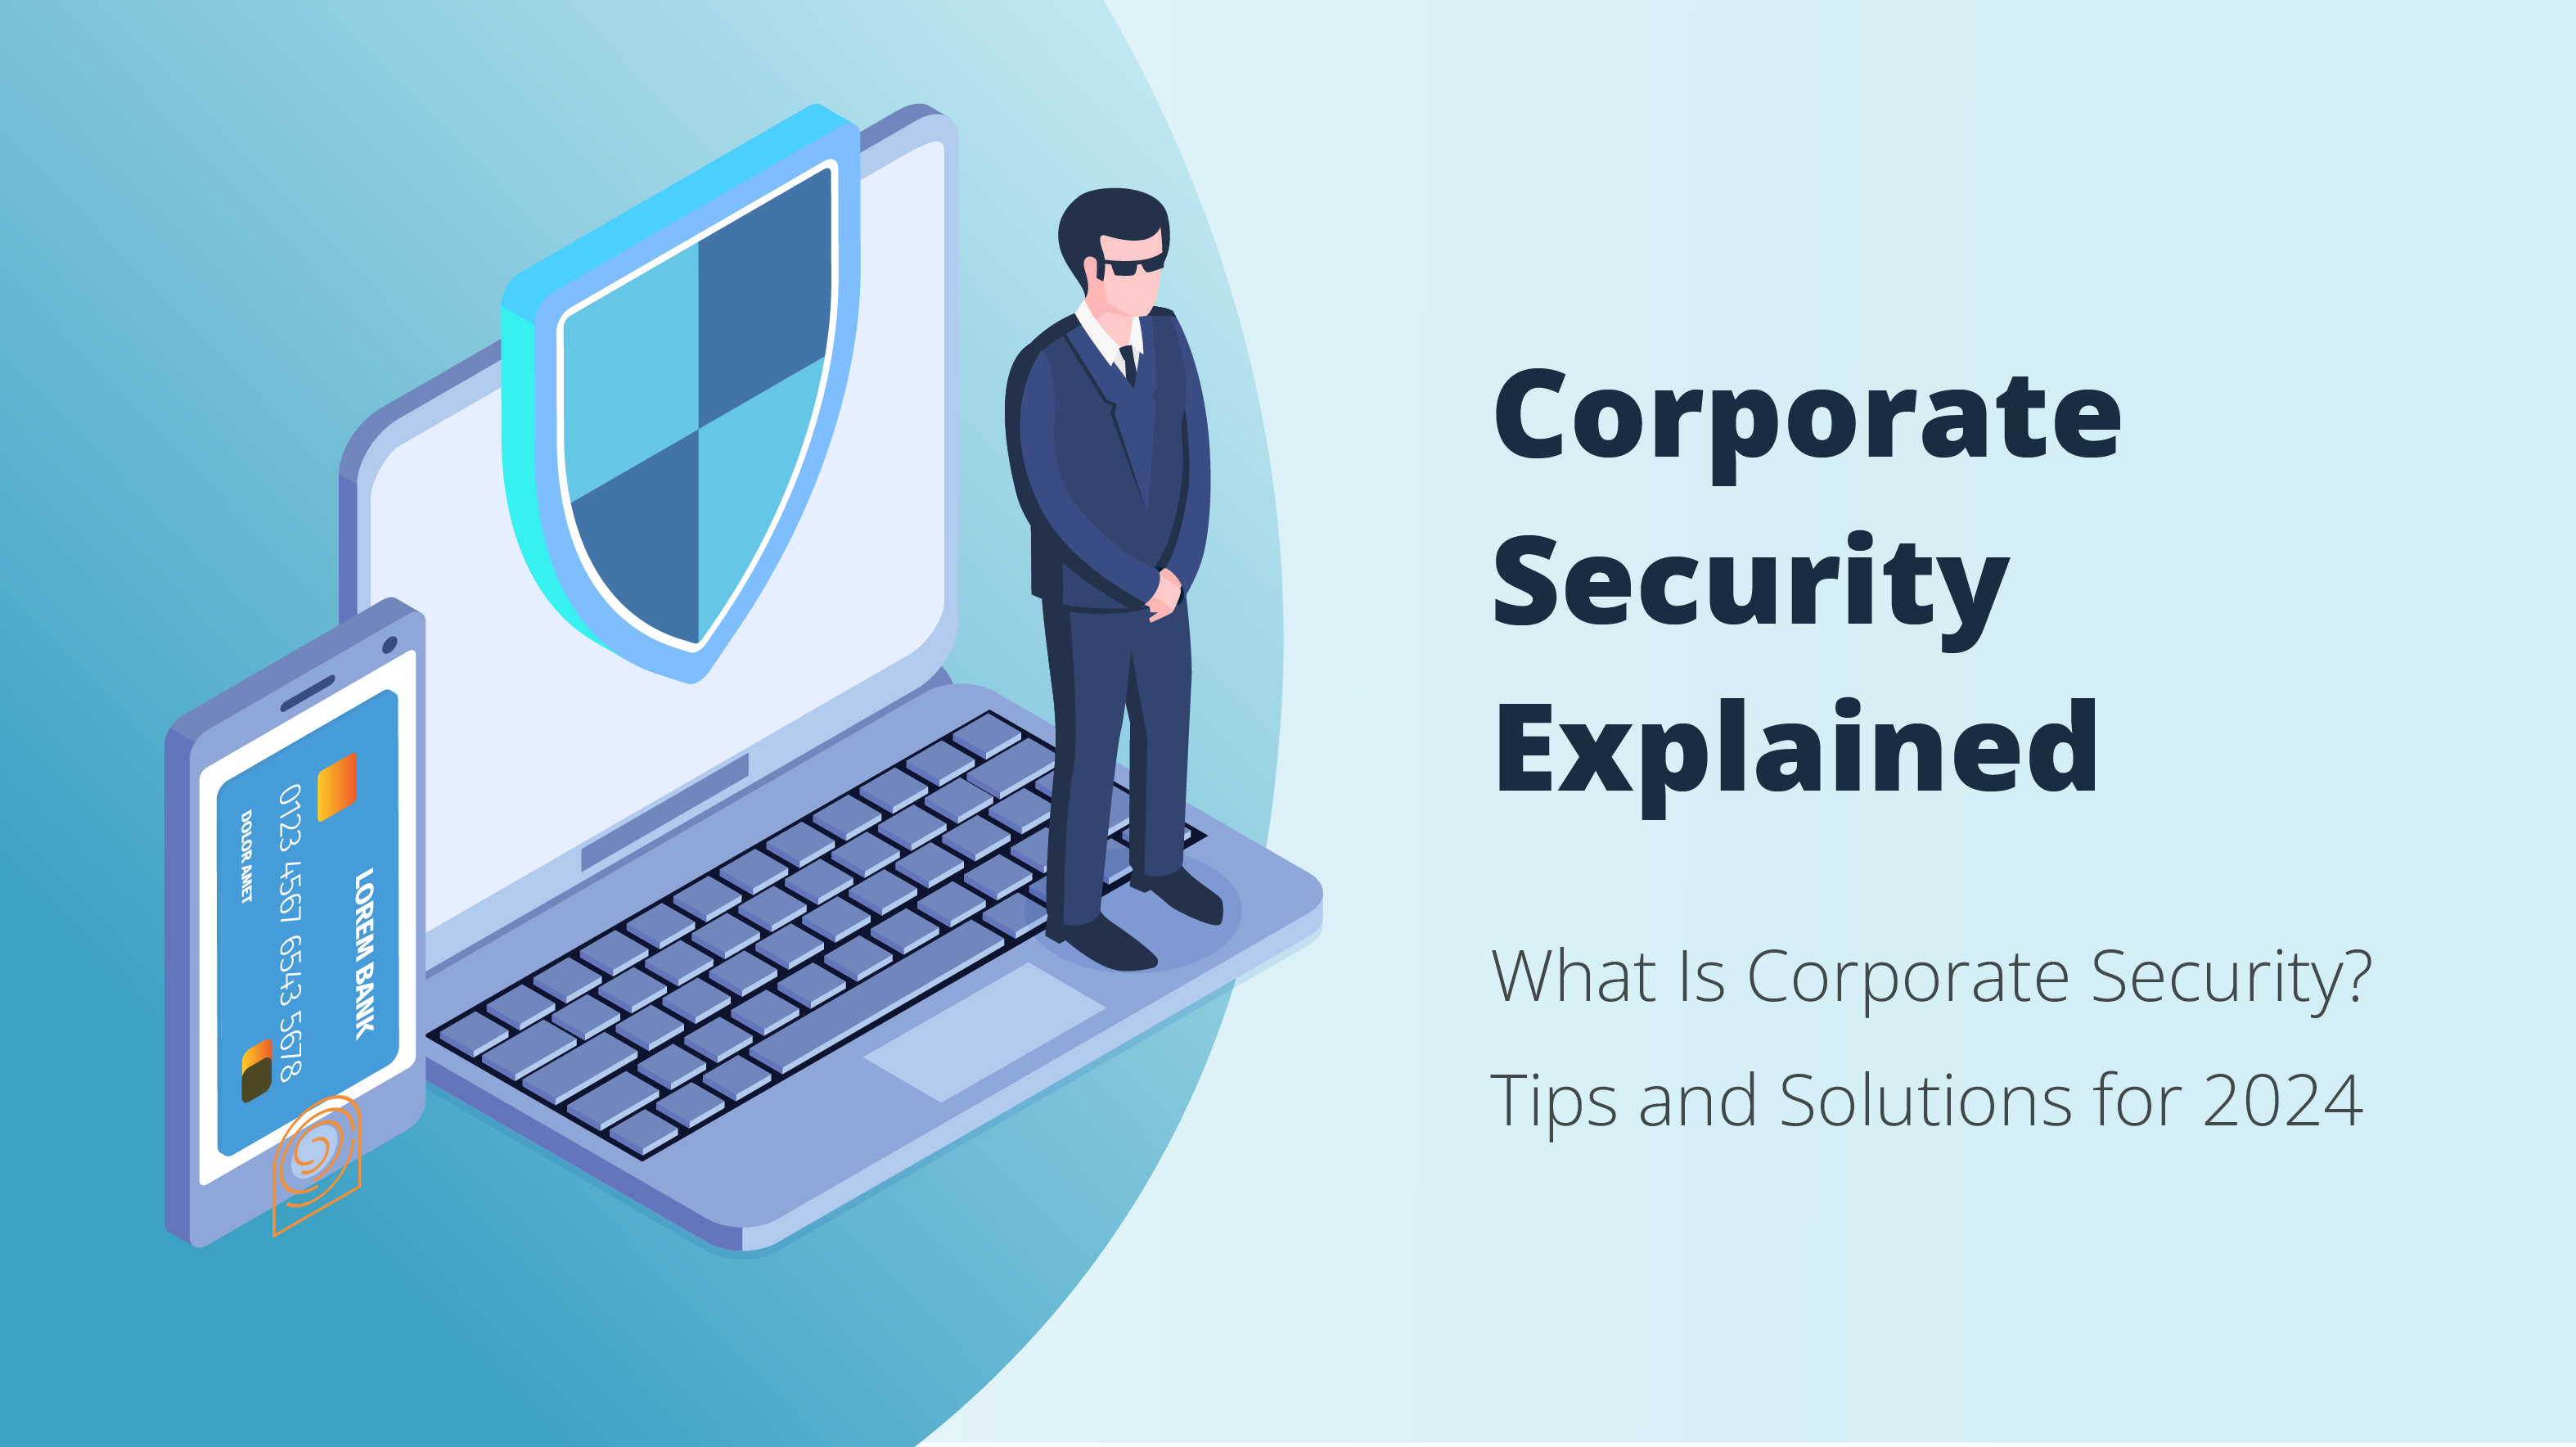 Corporate security tips and solutions